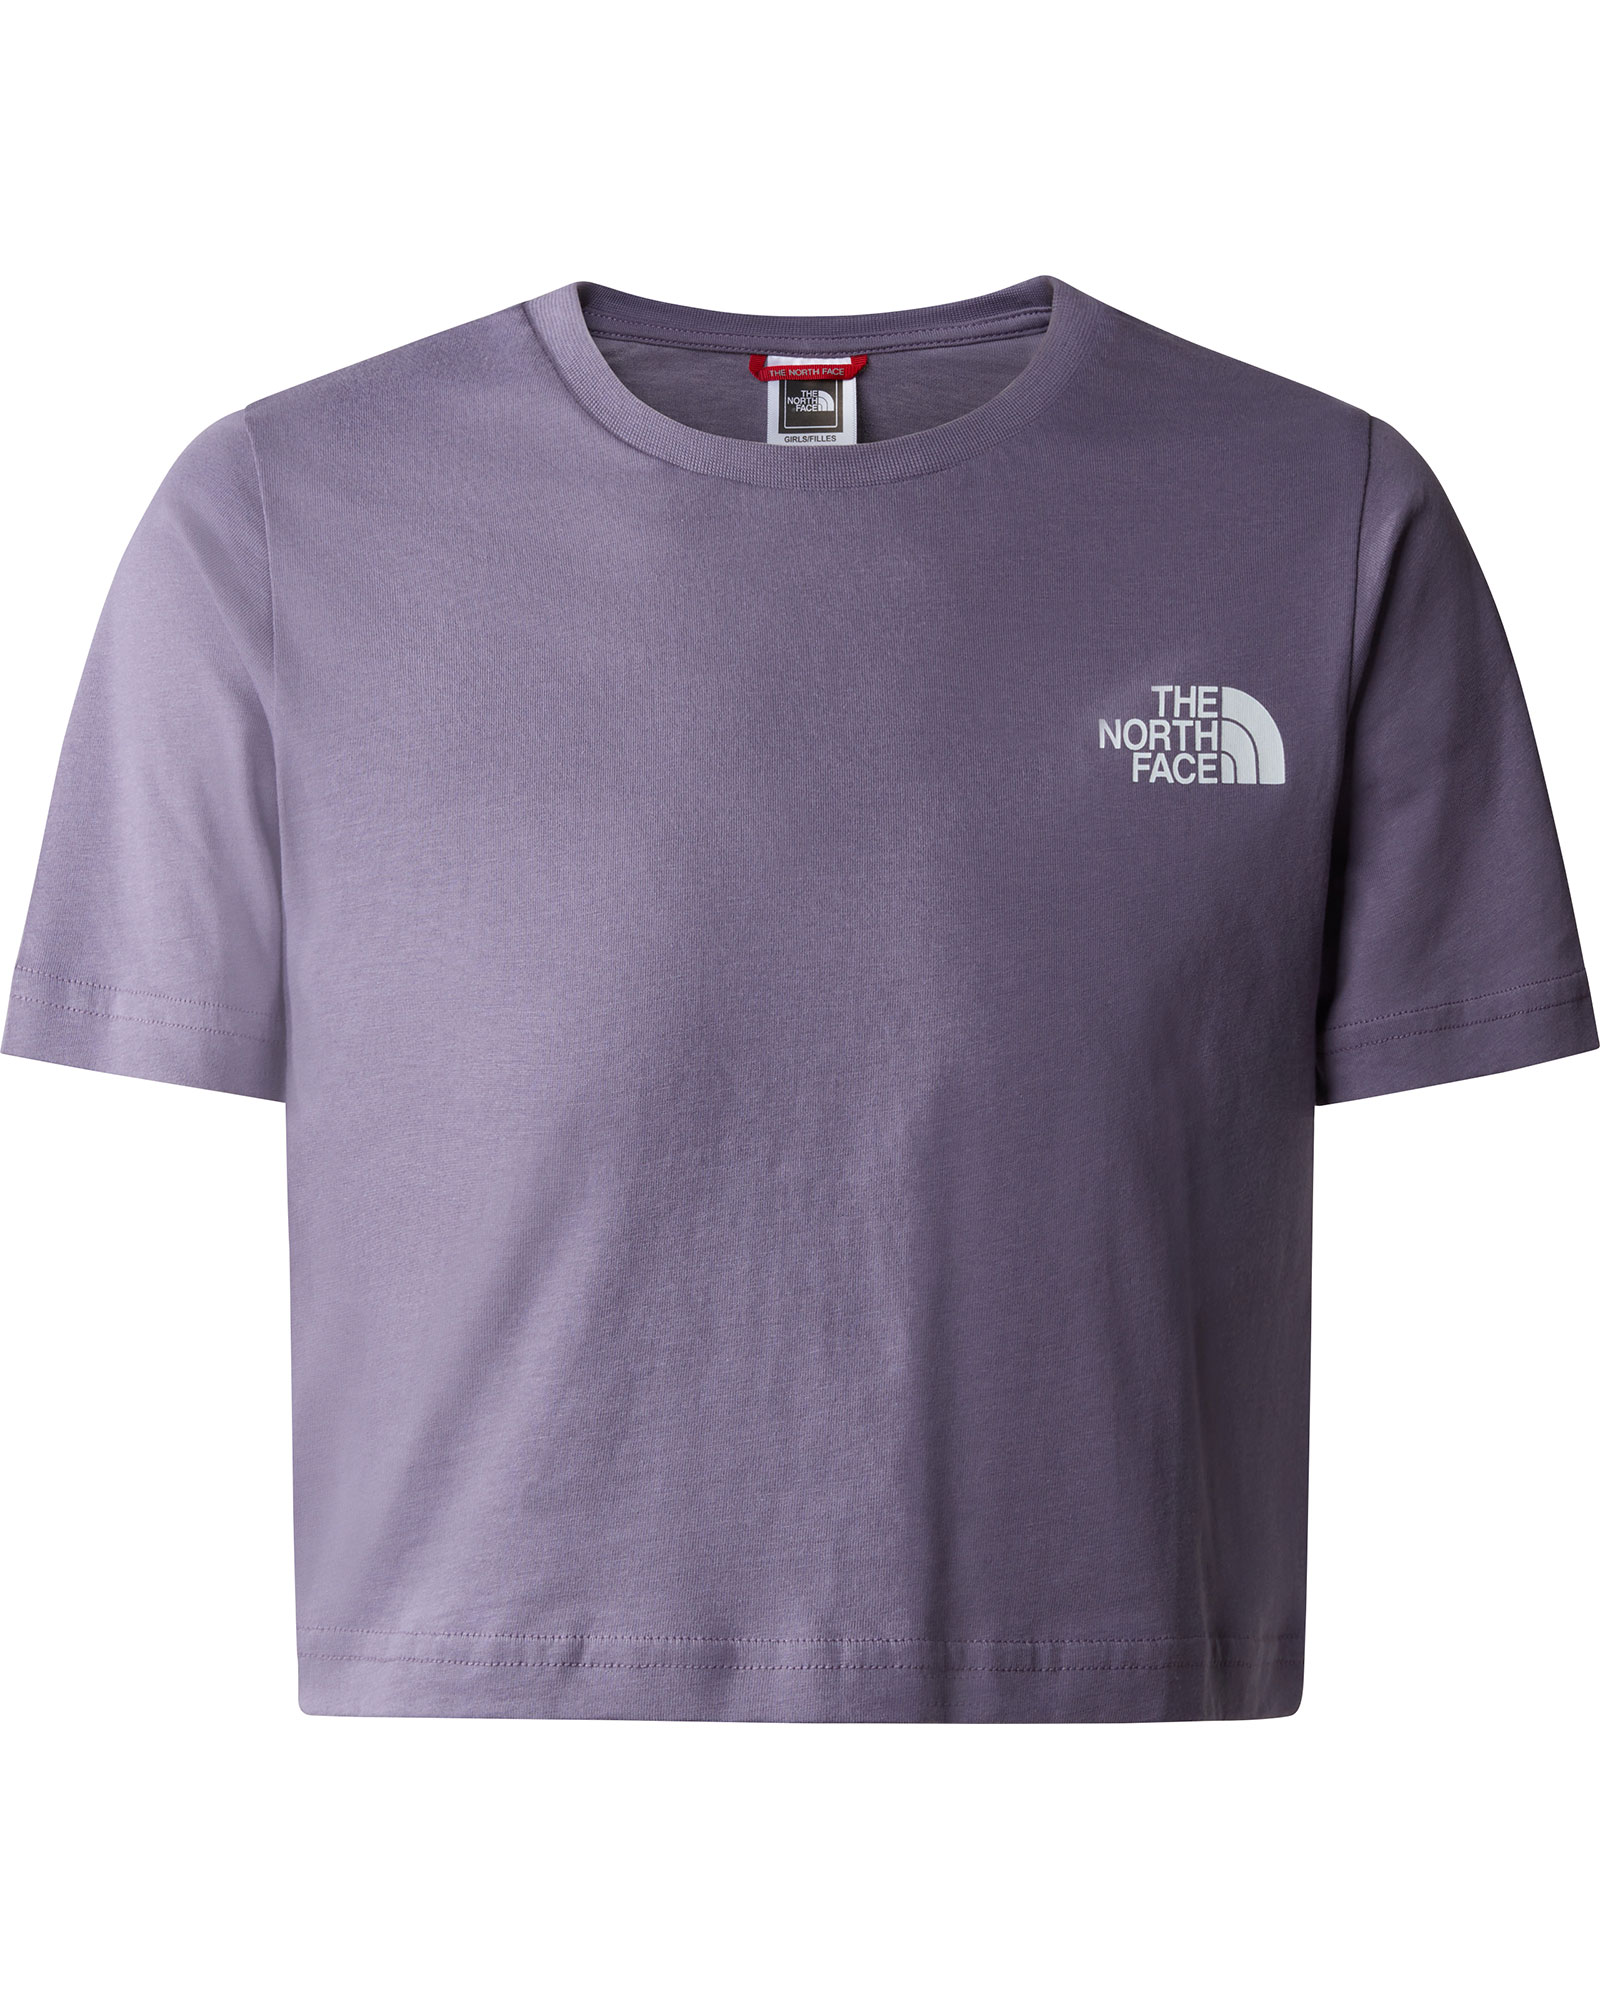 The North Face Girl’s Crop Simple Dome T Shirt XL - Lunar Slate XL